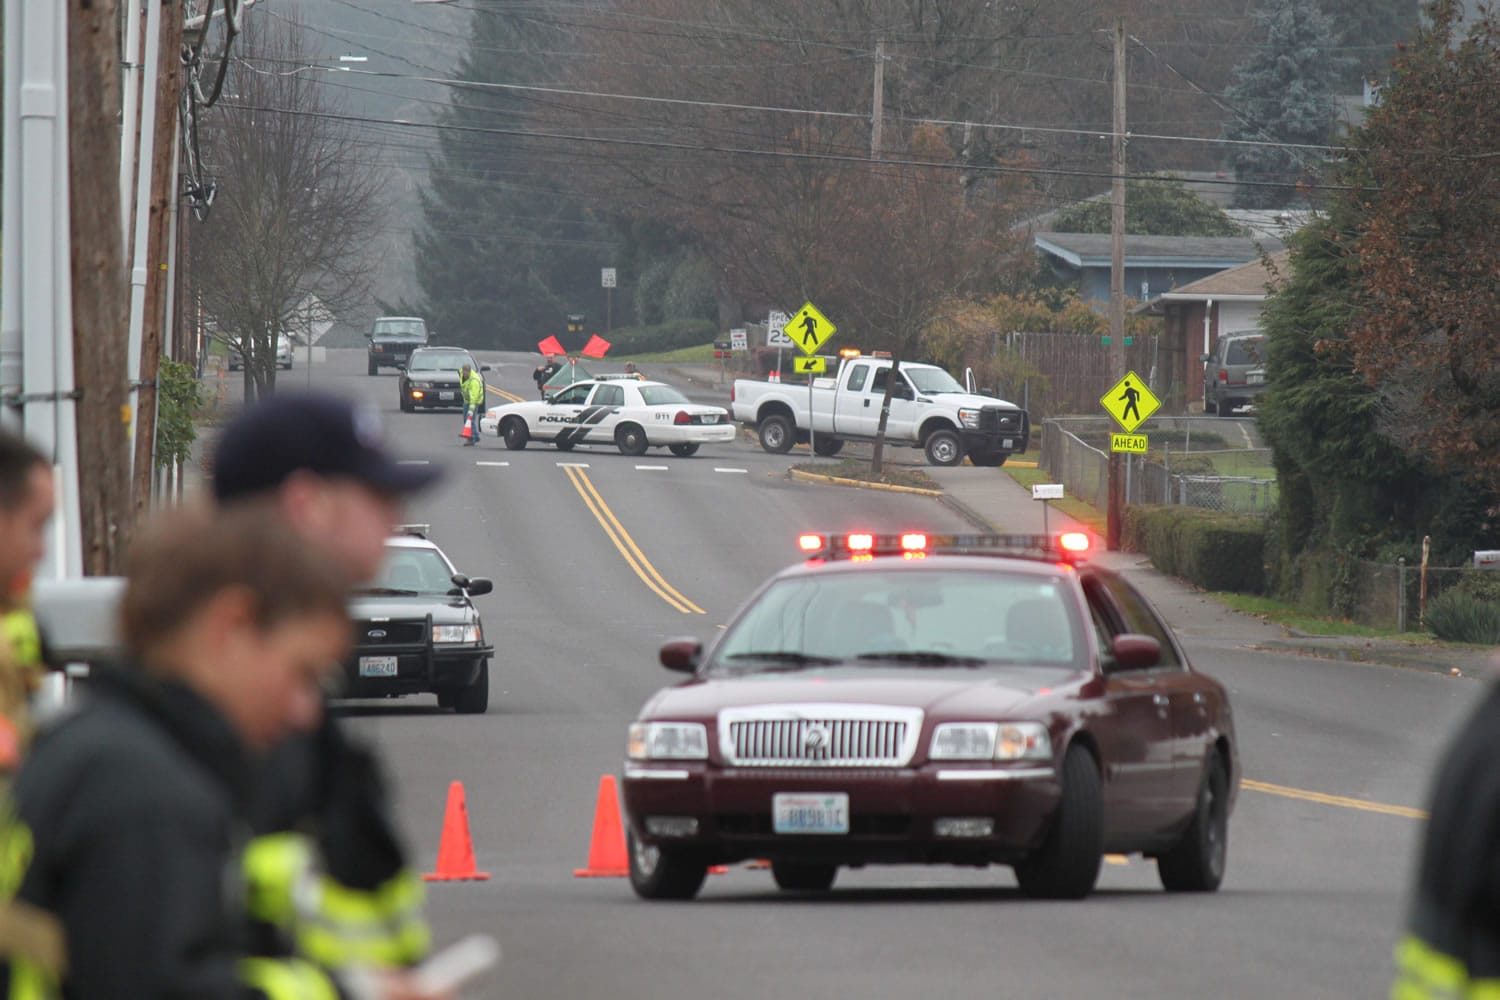 Police blocked off a four-block area in Washougal Wednesday as they responded to reports of shots fired and a house on fire at 3275 &quot;F&quot; Place.